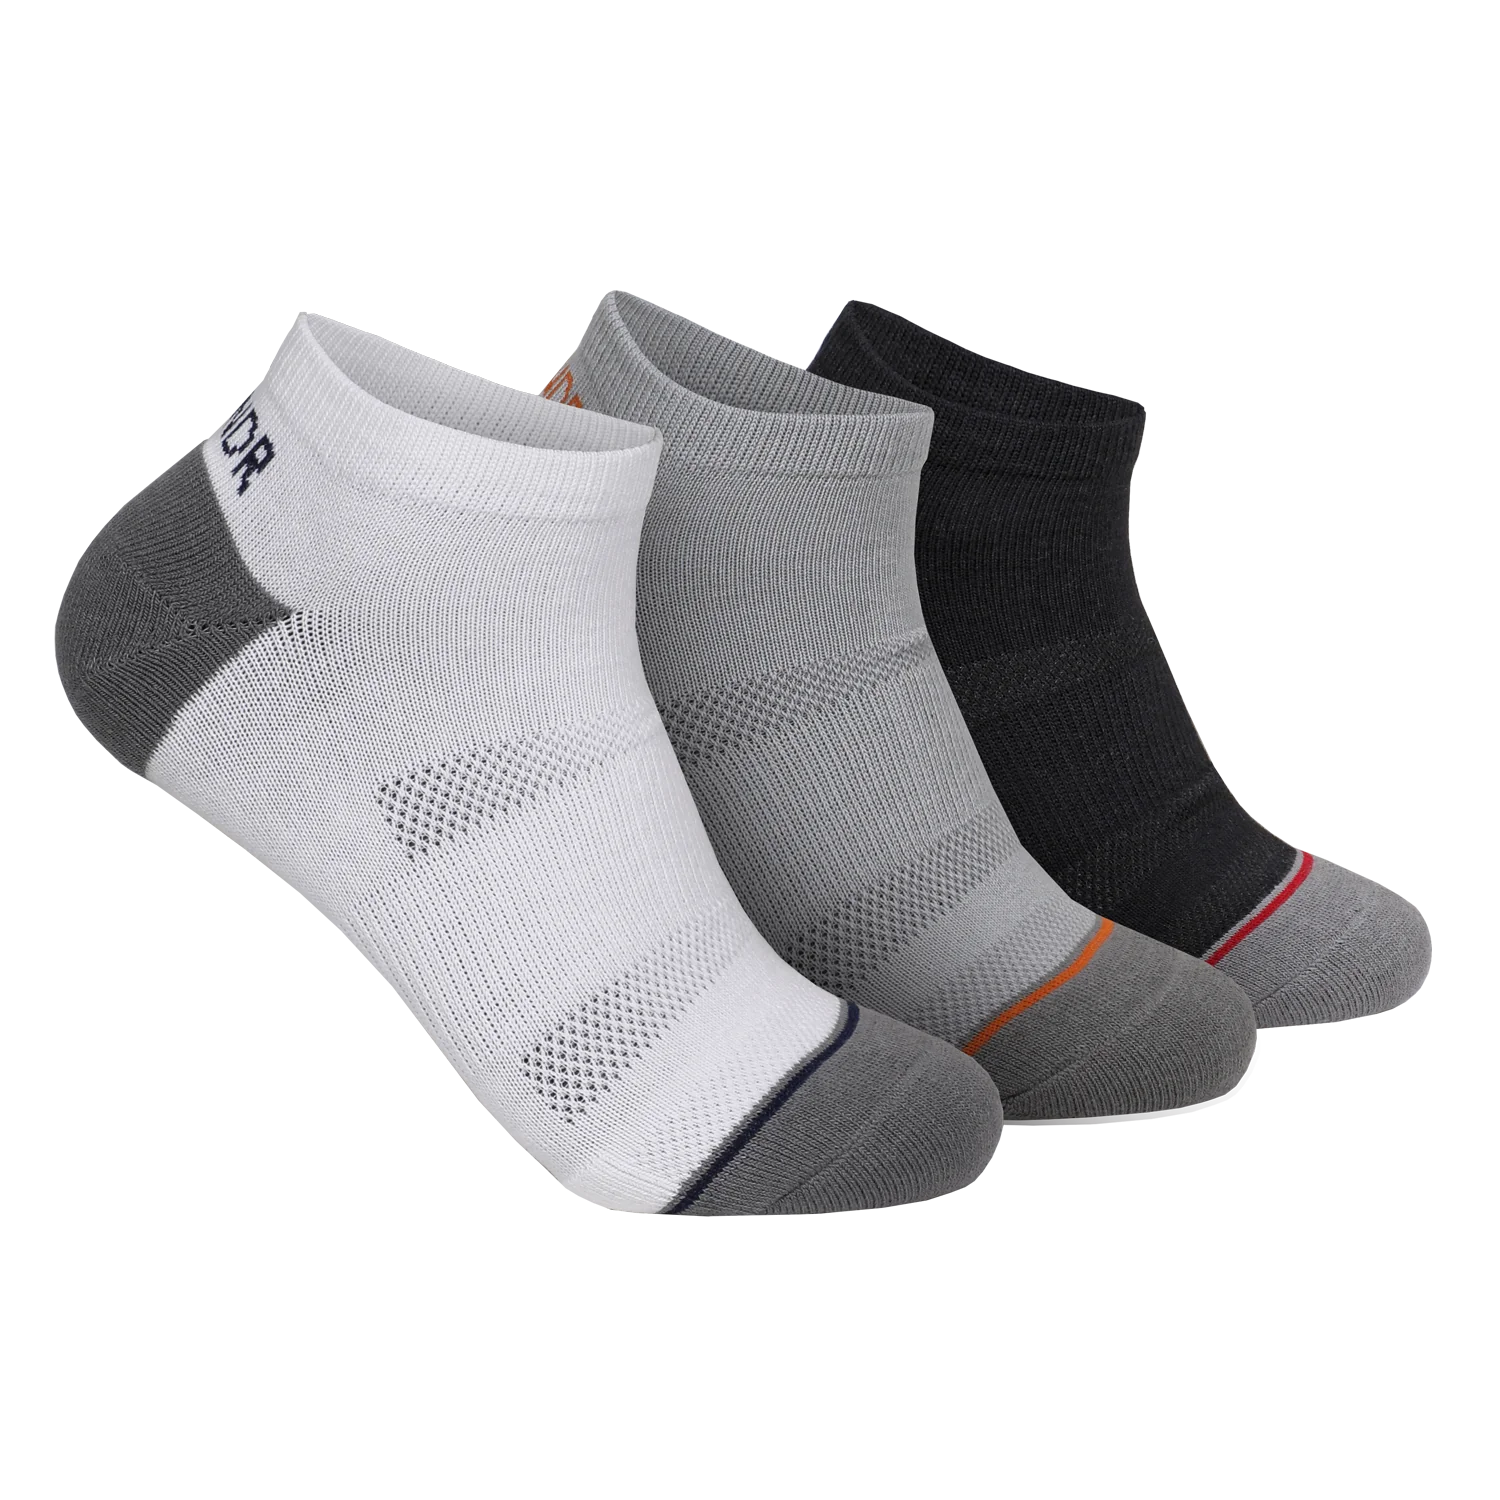 GROOVE ANKLE SOCK 3 PACK - ASSORTED